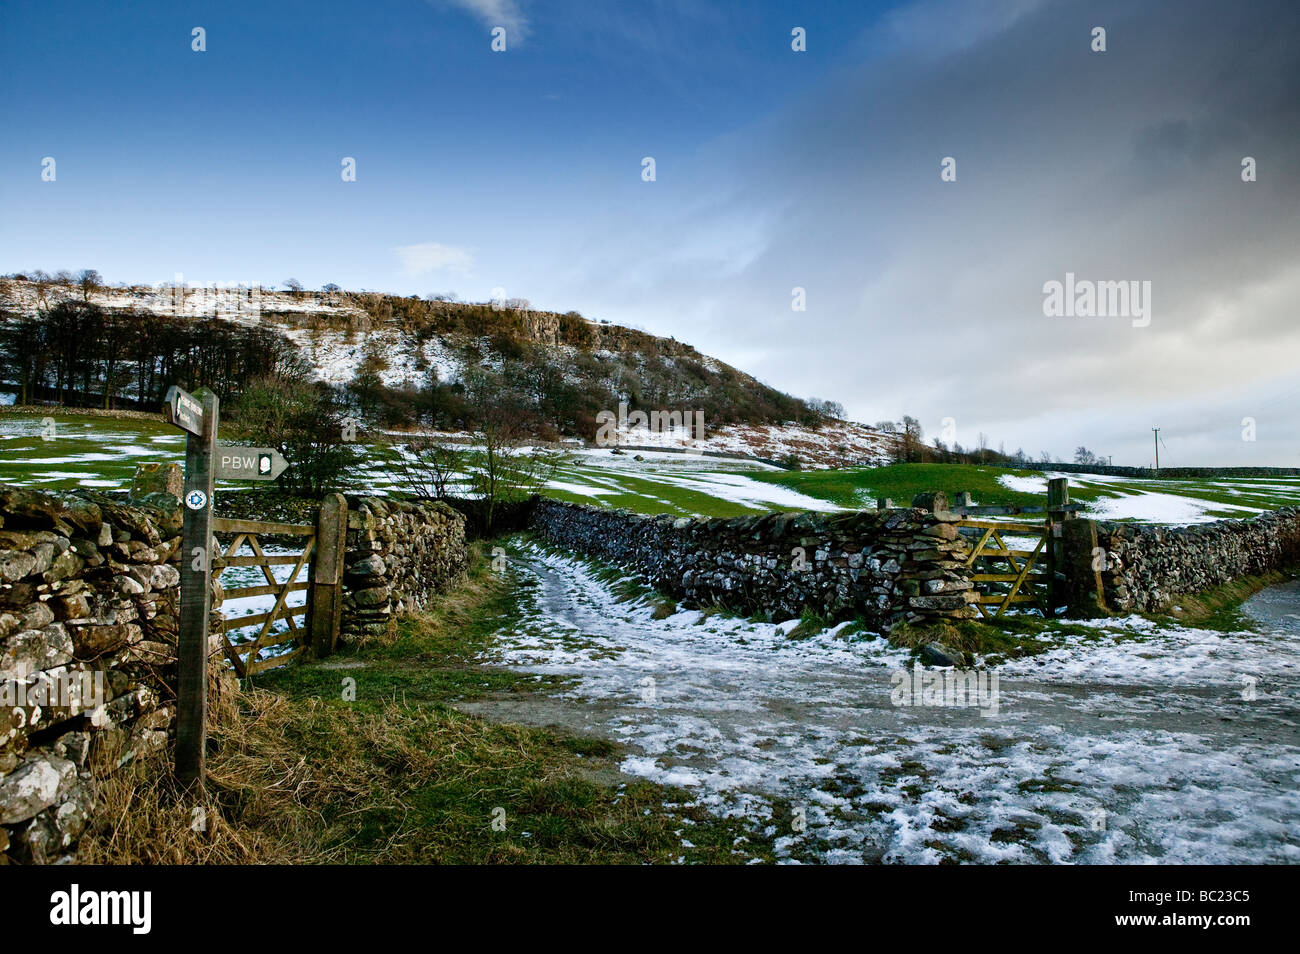 Bridleways and footpaths converge at the gates to fields in the Yorkshire Dales, near Austwick. Stock Photo